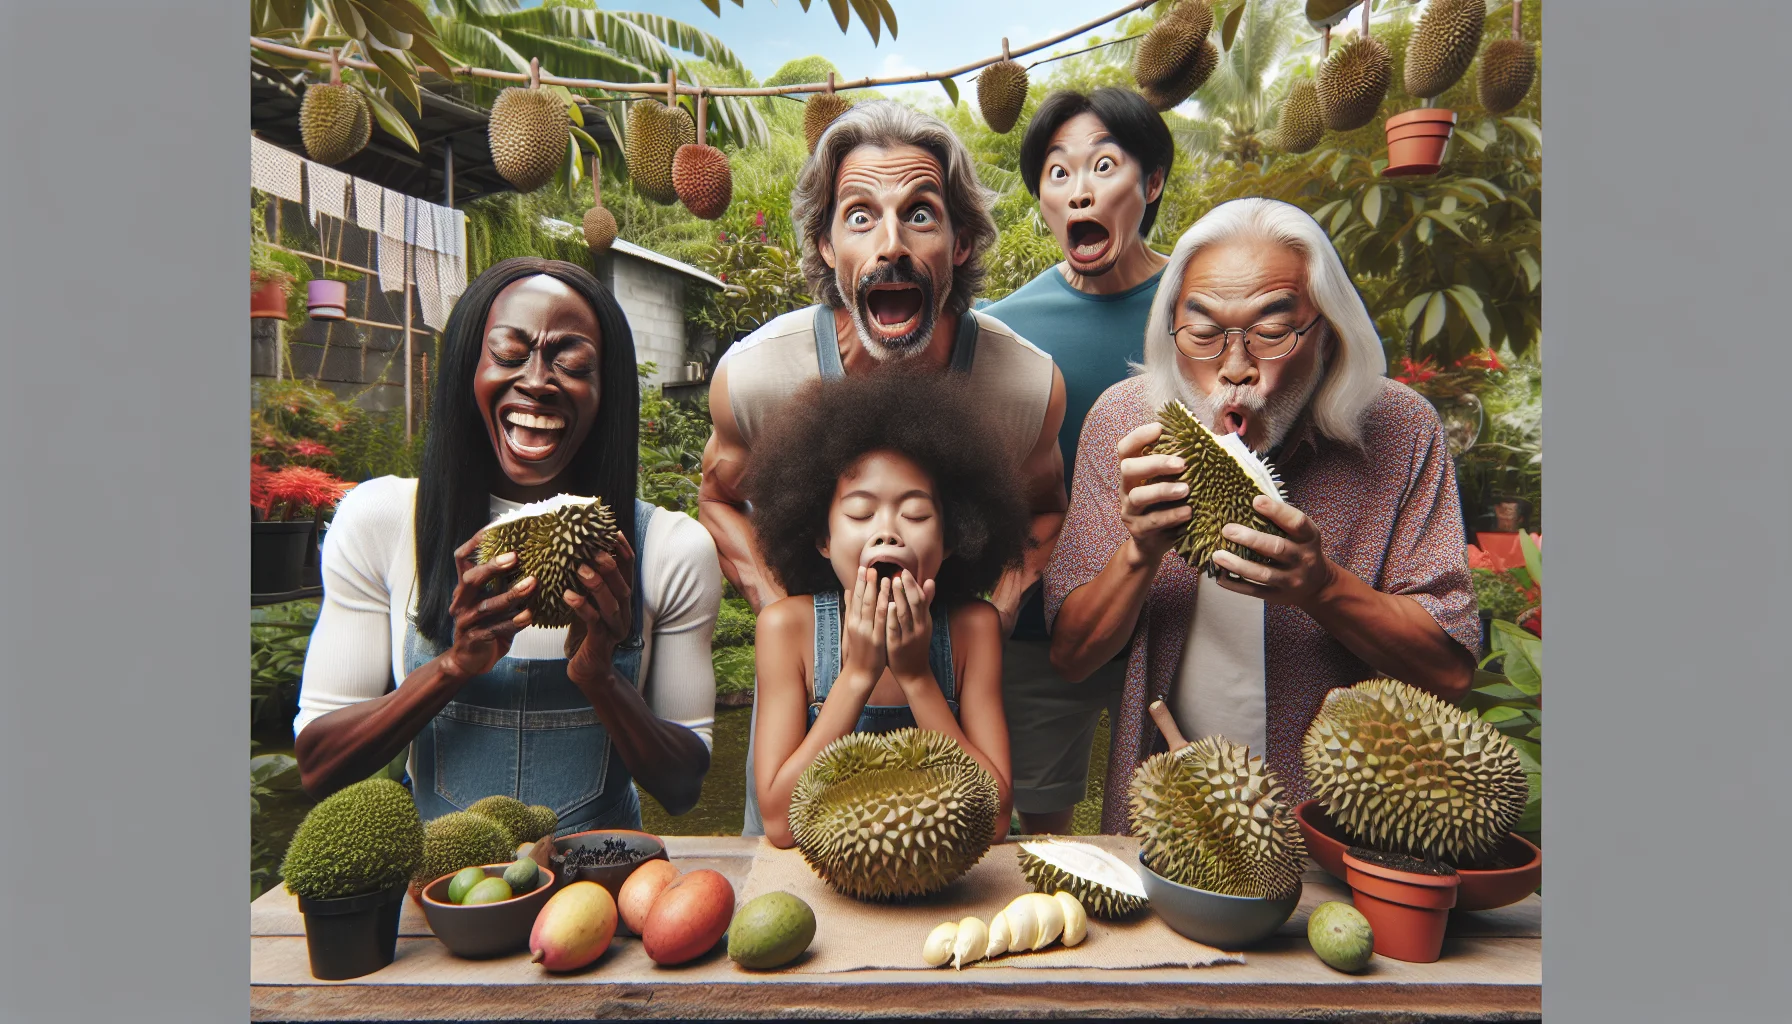 Imagine an amusing garden scene where a group of diverse individuals are tasting durian for the first time. Directly in the center, an African-American woman is seen excitedly opening the spiky fruit, her eyes twinkling with anticipation, while a middle-aged Caucasian man to her right is animatedly holding his nose, making a face. To the left, a young South Asian boy is bravely attempting a taste, his expression filled with trepidation yet determination. The backdrop includes luscious greenery, neatly arranged plants, and a flourishing durian tree. The mood of the scene overall is cheerful, inviting, and promotes the joy of gardening and trying new tastes.